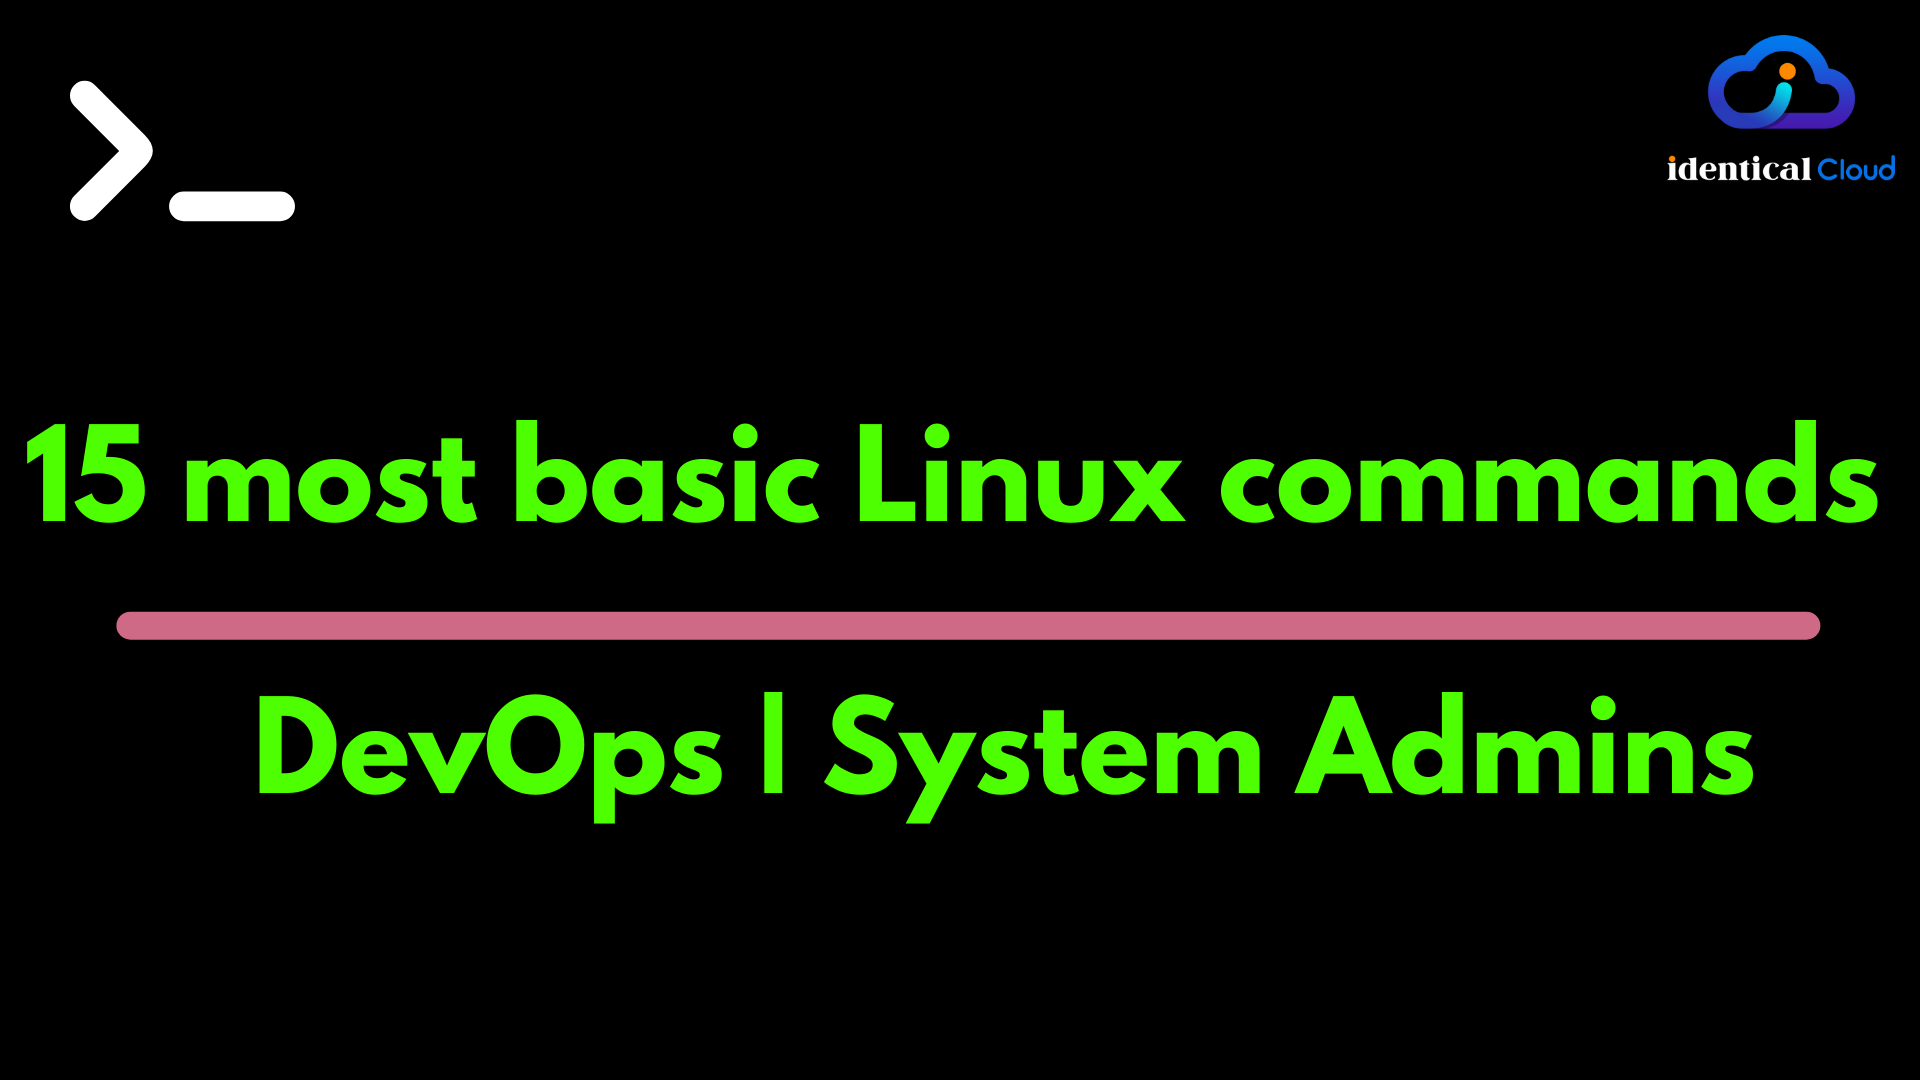 15 most basic Linux commands every system admin and DevOps must know